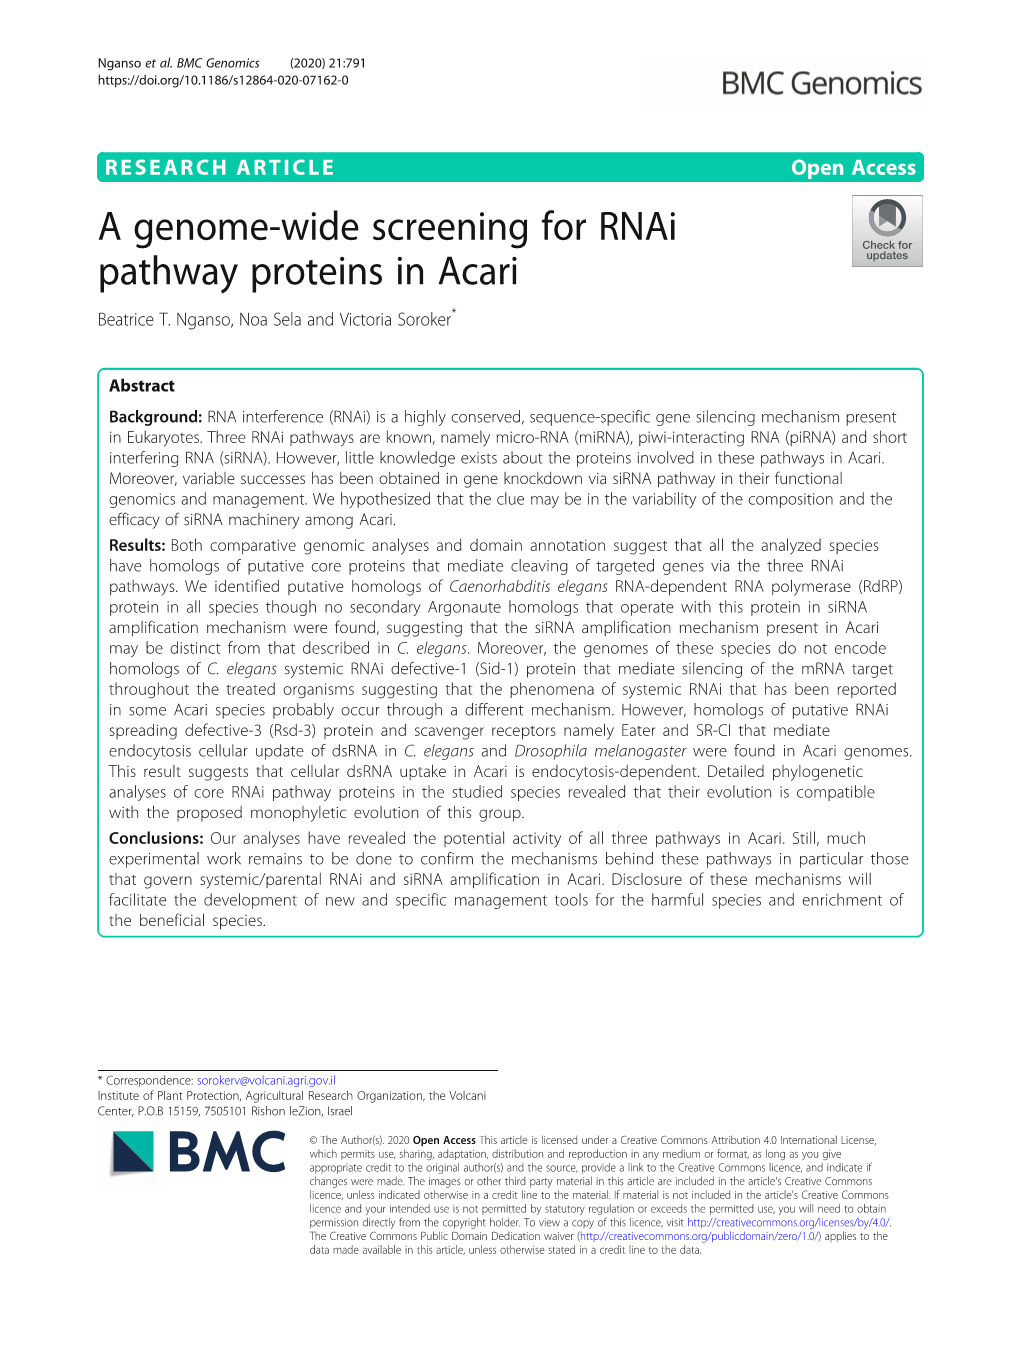 A Genome-Wide Screening for Rnai Pathway Proteins in Acari Beatrice T